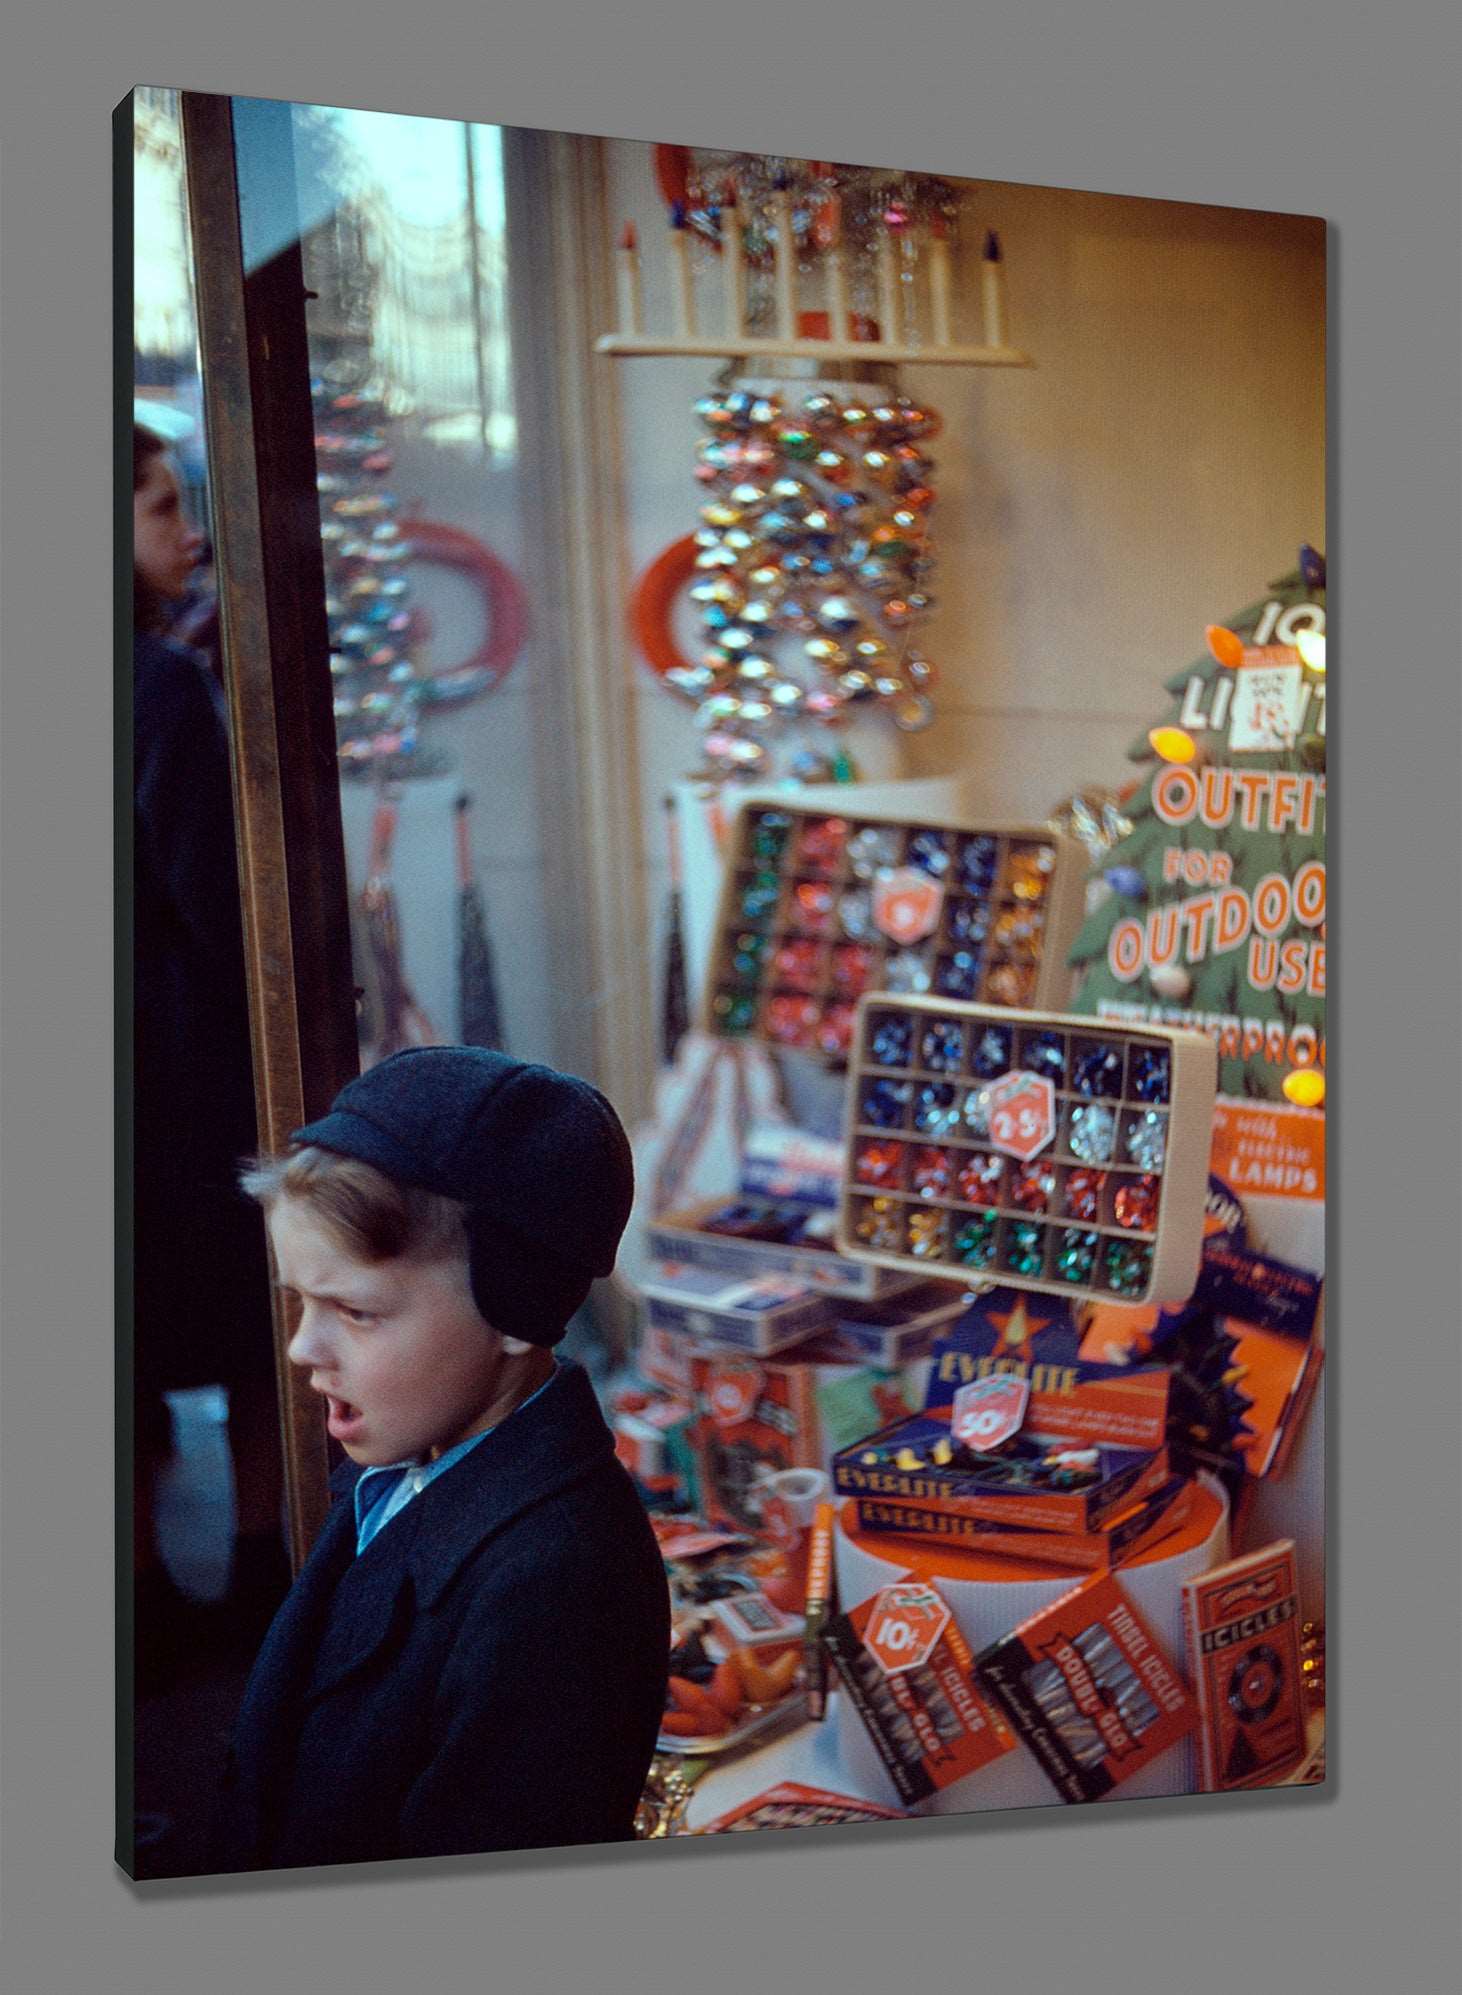 A canvas reproduction print of a vintage photograph of a store's Christmas display